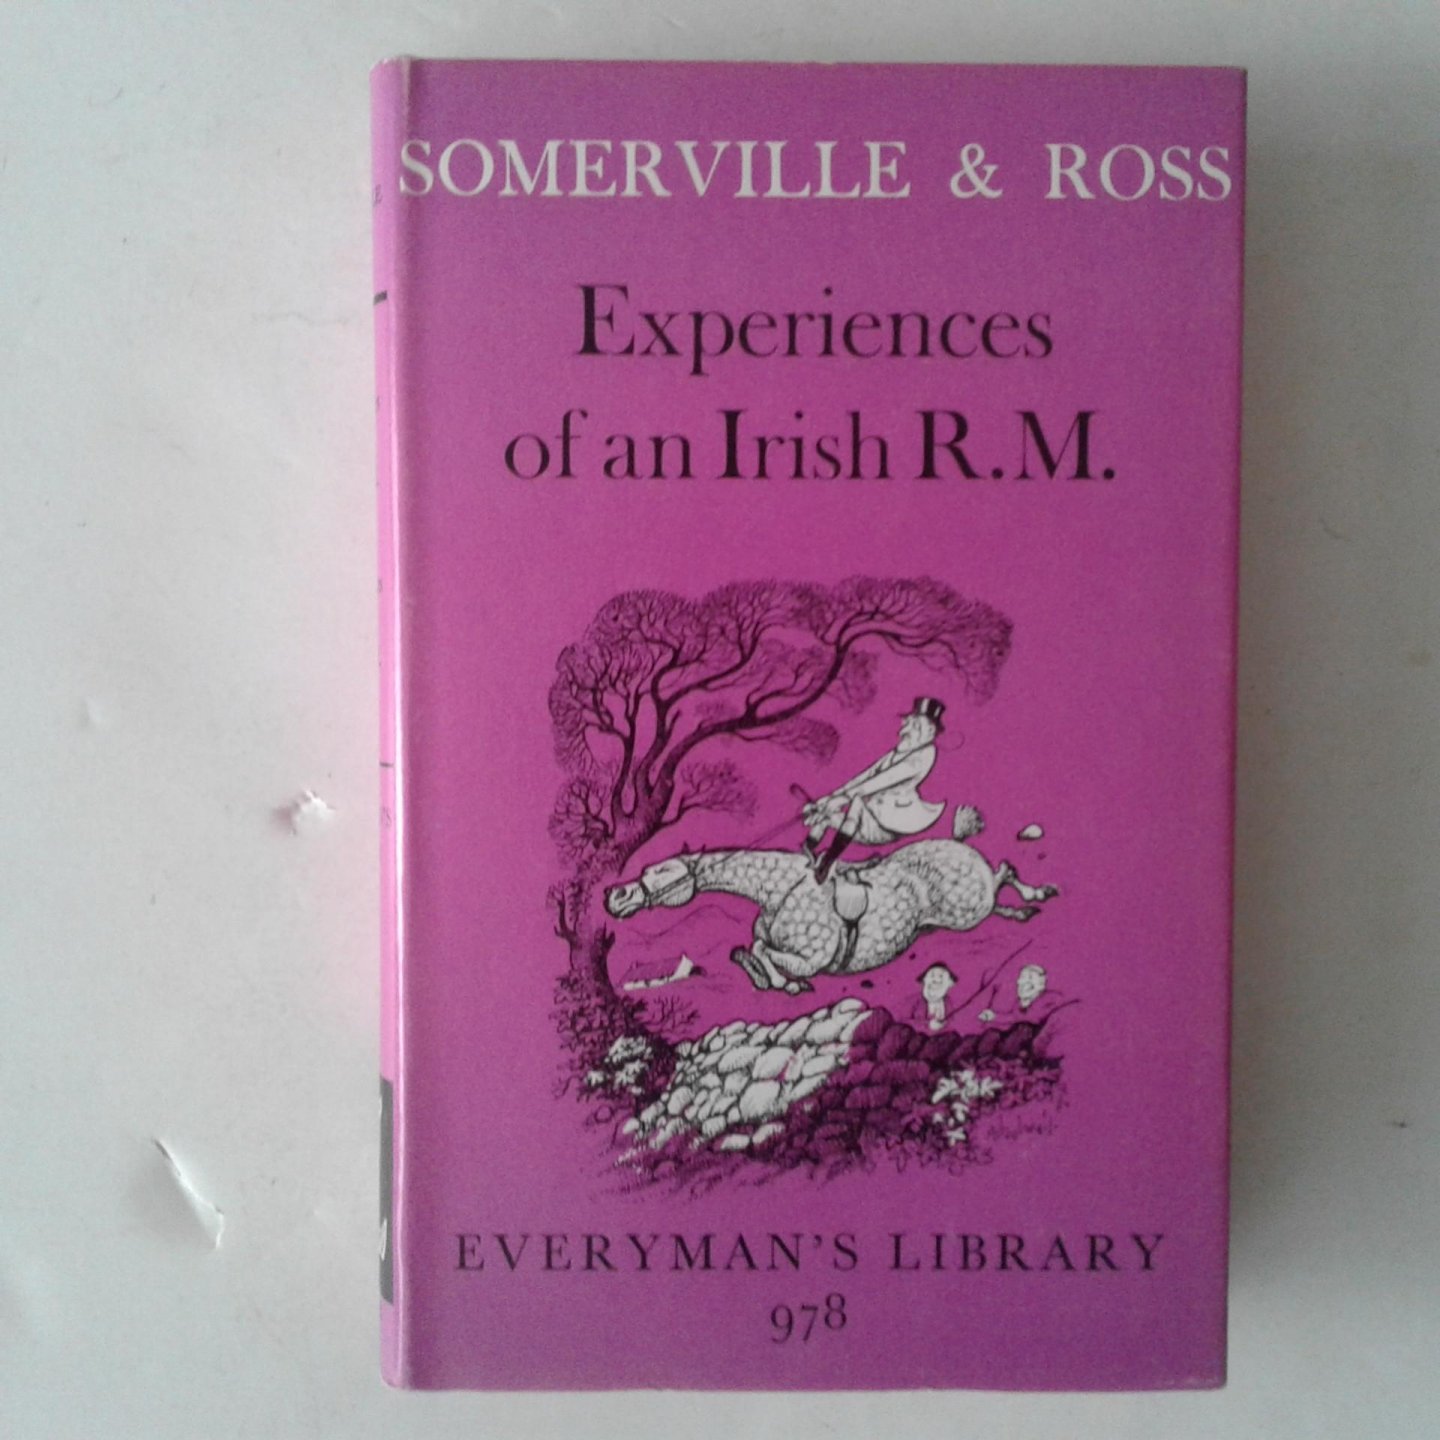 Sommerville & Ross - Experiences of an Irish R.M.